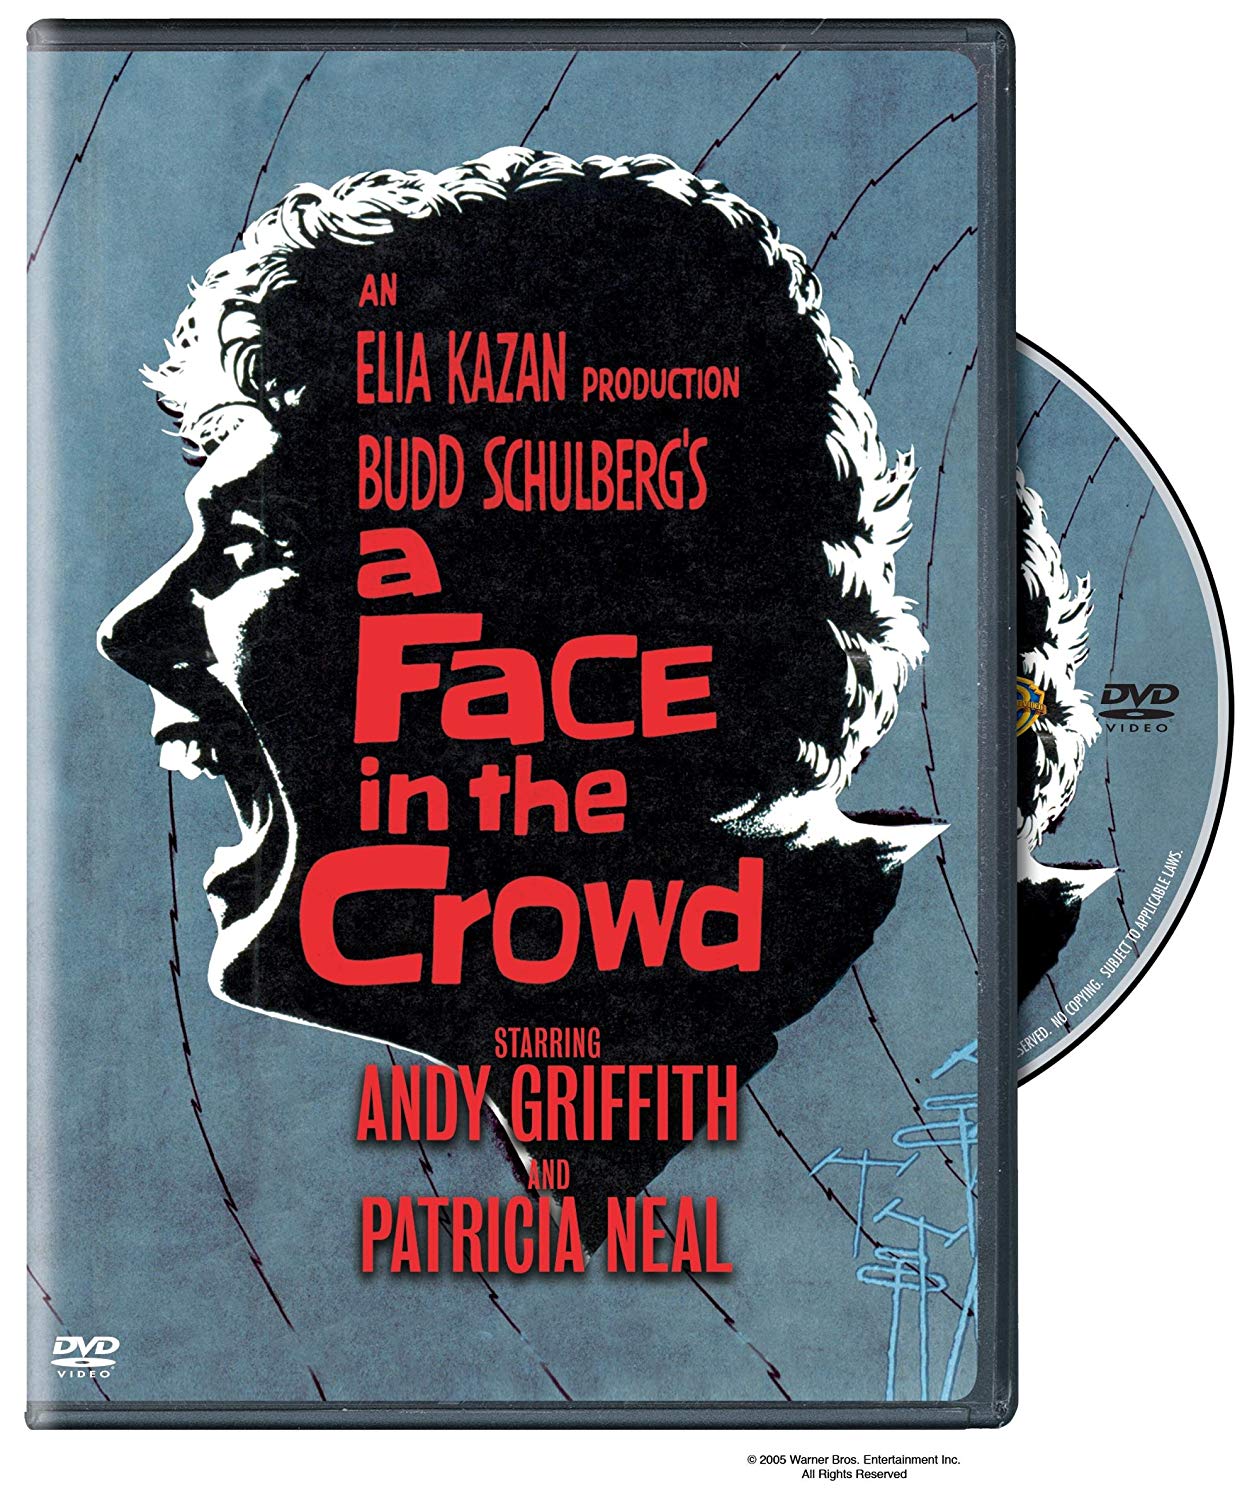 A Face in the Crowd (1957) starring Andy Griffith, Patricia Neal, Walter Matthau, Lee Remick, directed by Elia Kazan